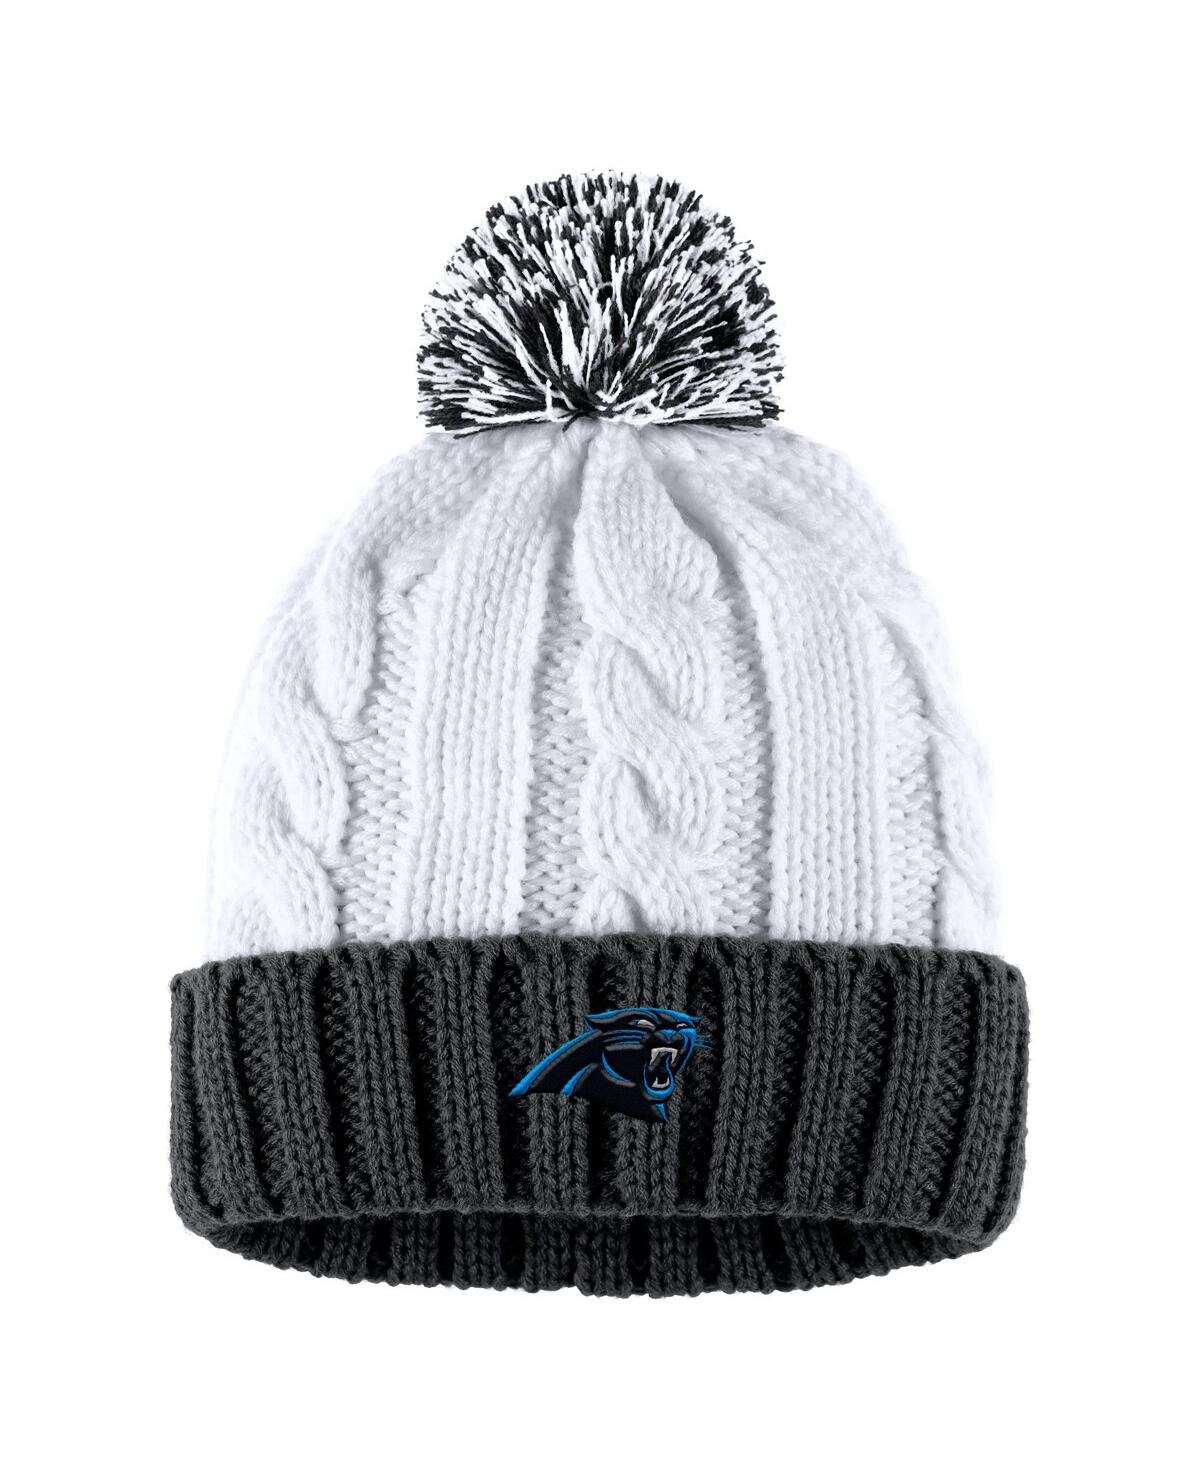 Shop Wear By Erin Andrews Women's  Black, White Carolina Panthers Cable Stripe Cuffed Knit Hat With Pom An In Black,white